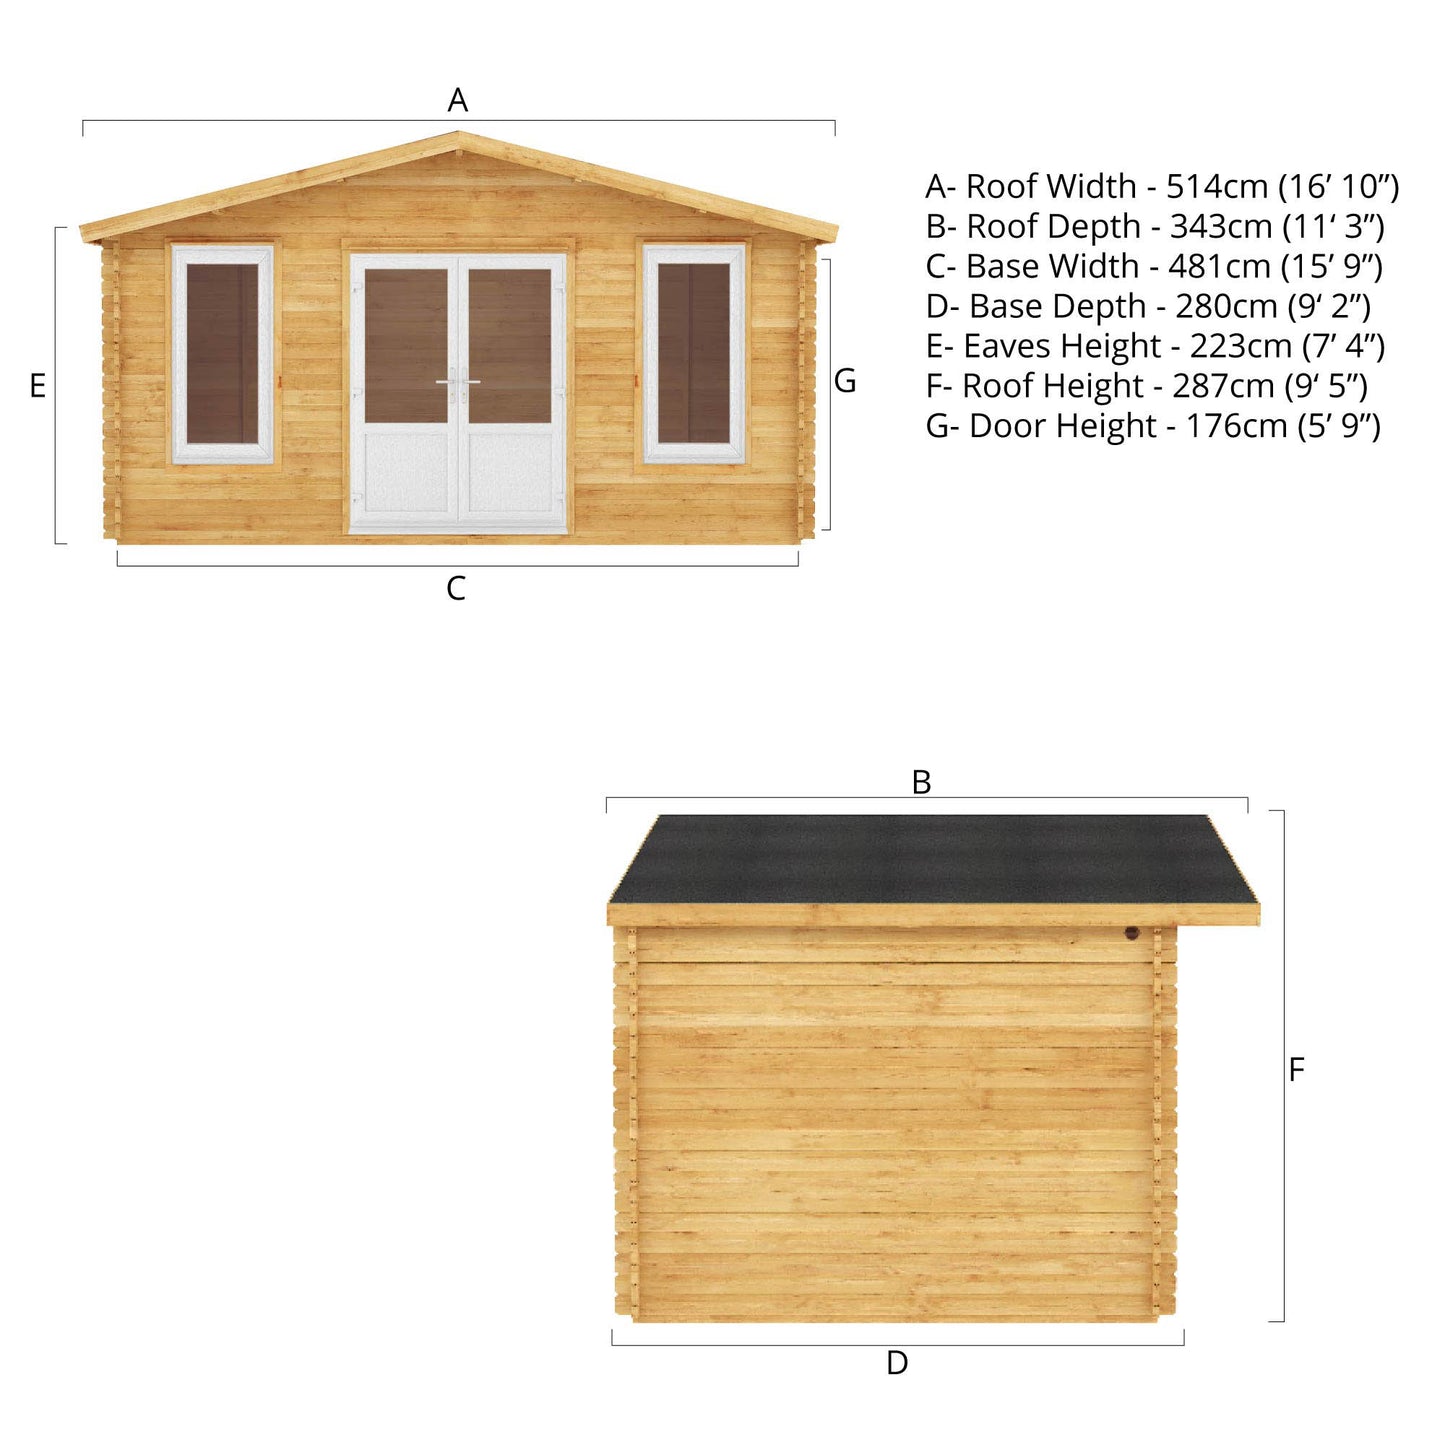 The 5m x 3m Sparrow Log Cabin with White UPVC